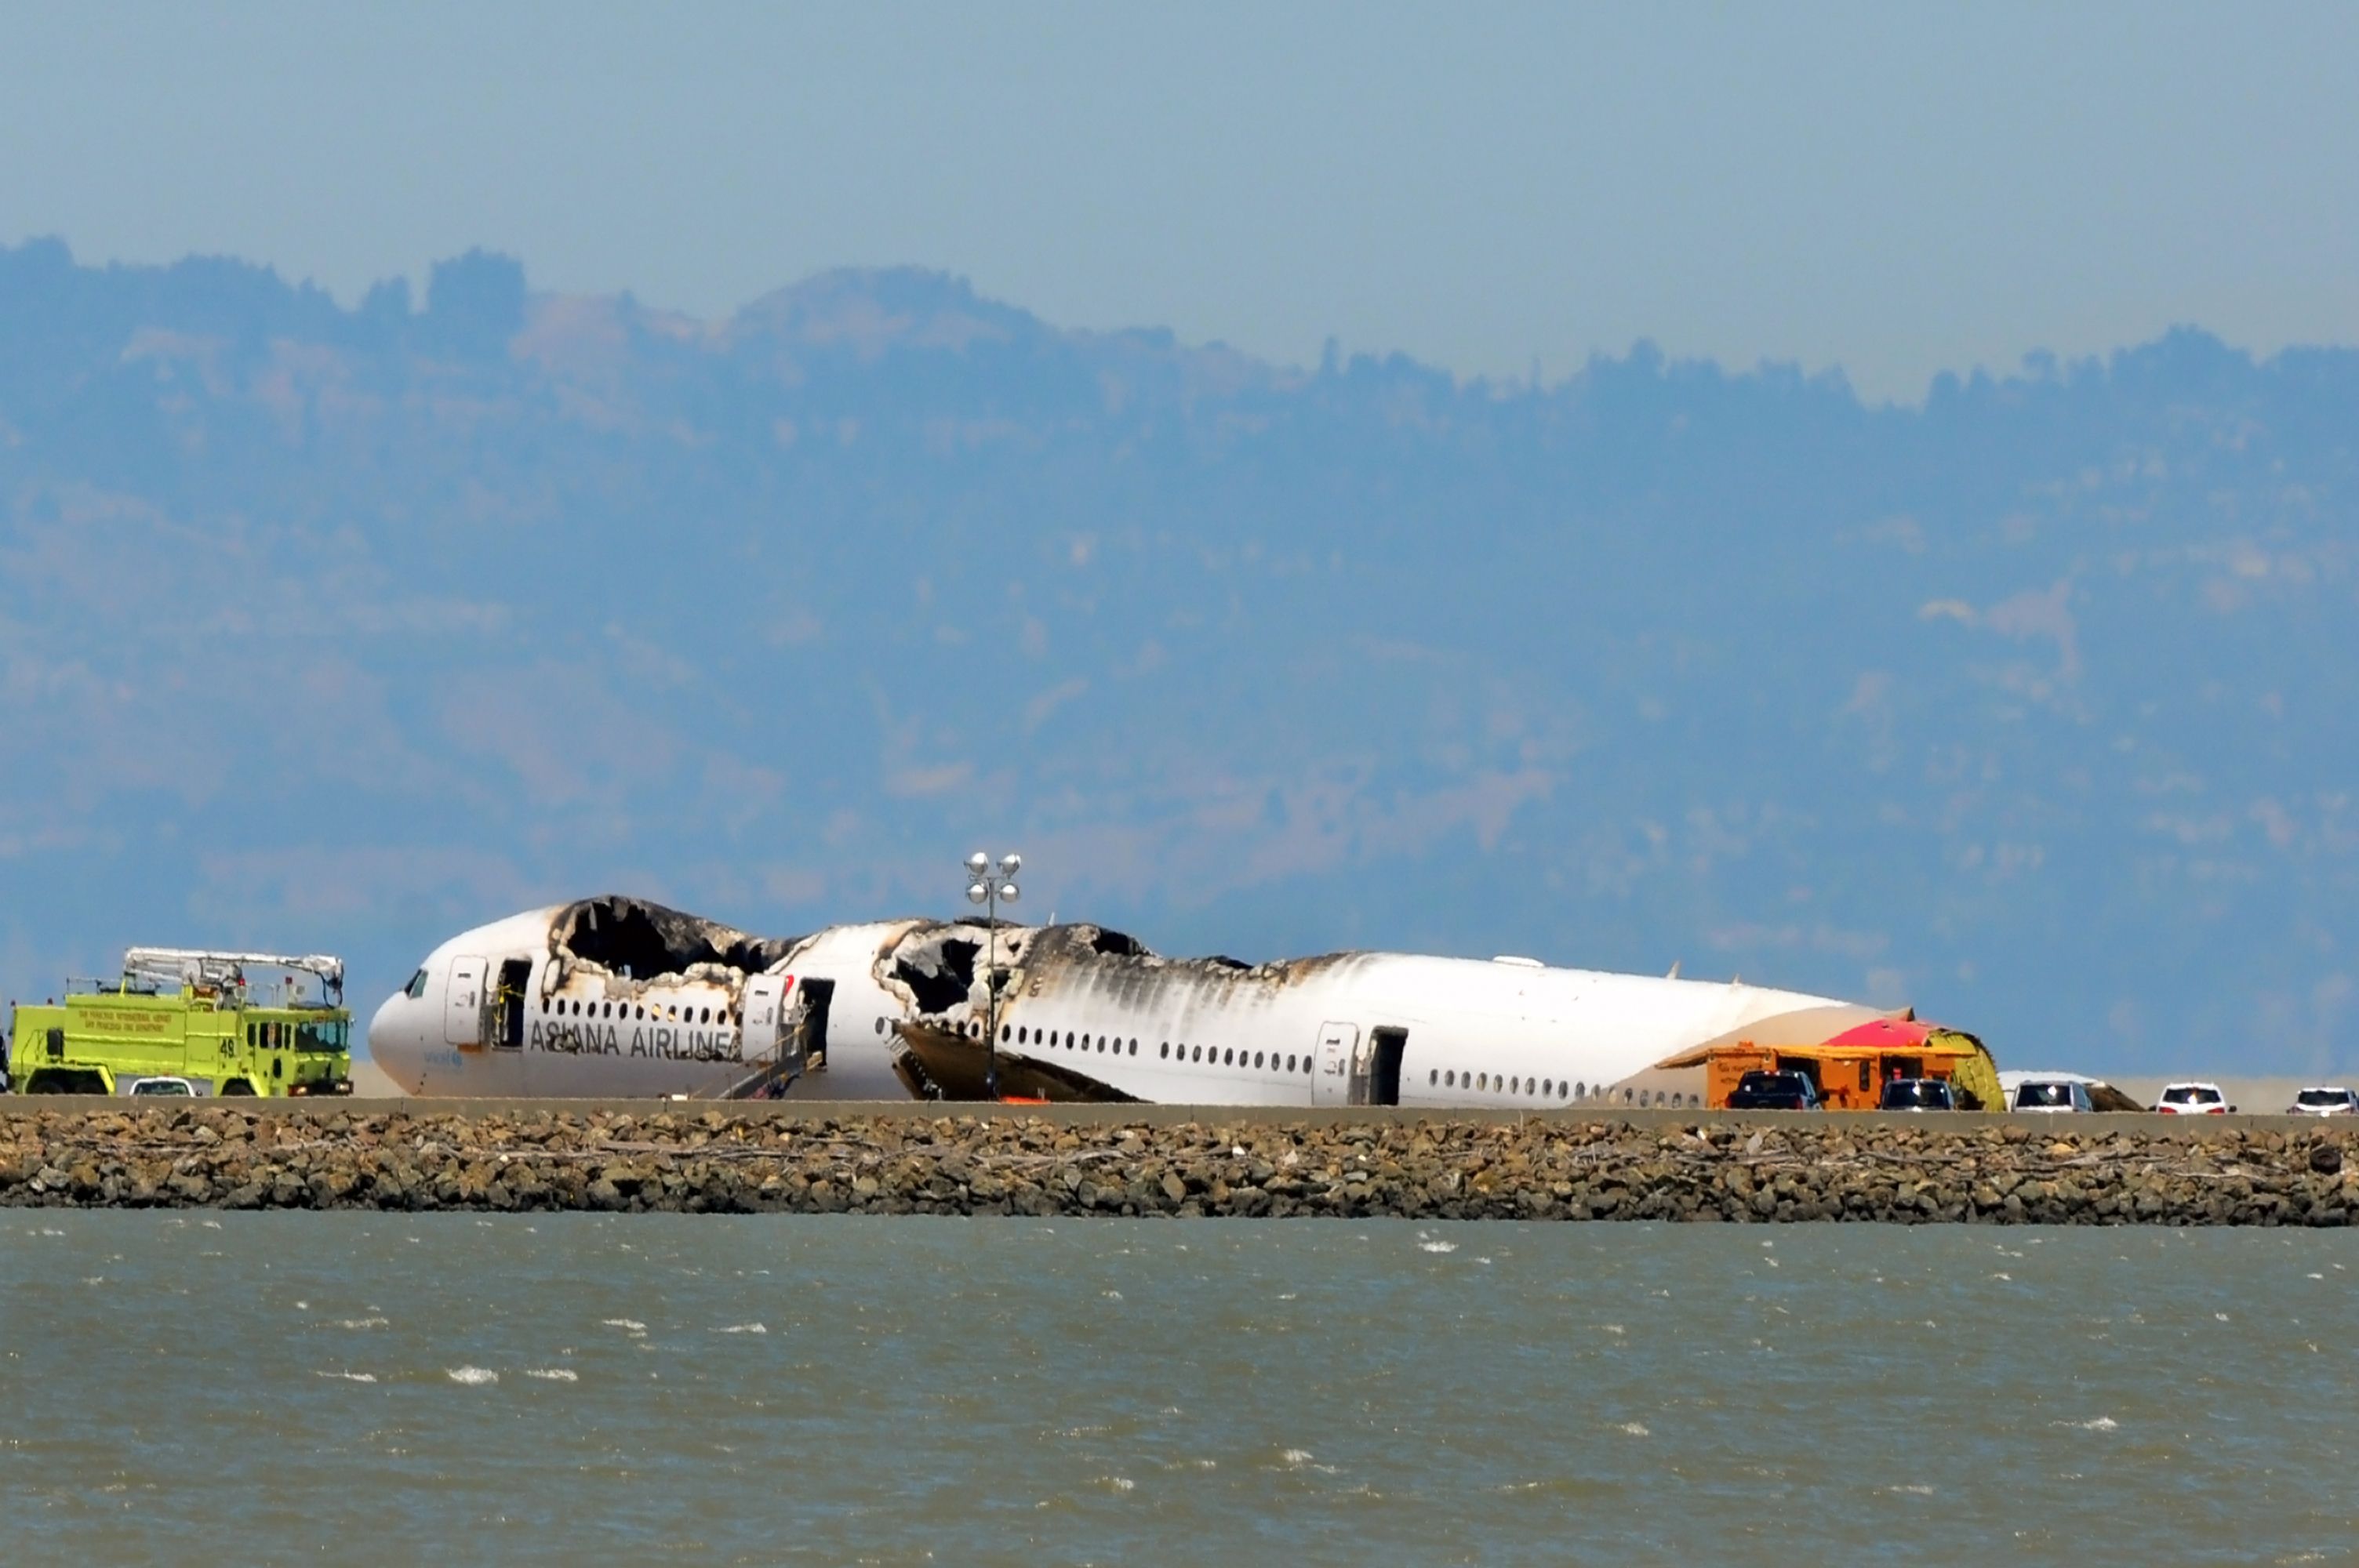 Wreckage of Asiana Airlines Flight 214 at SFO.